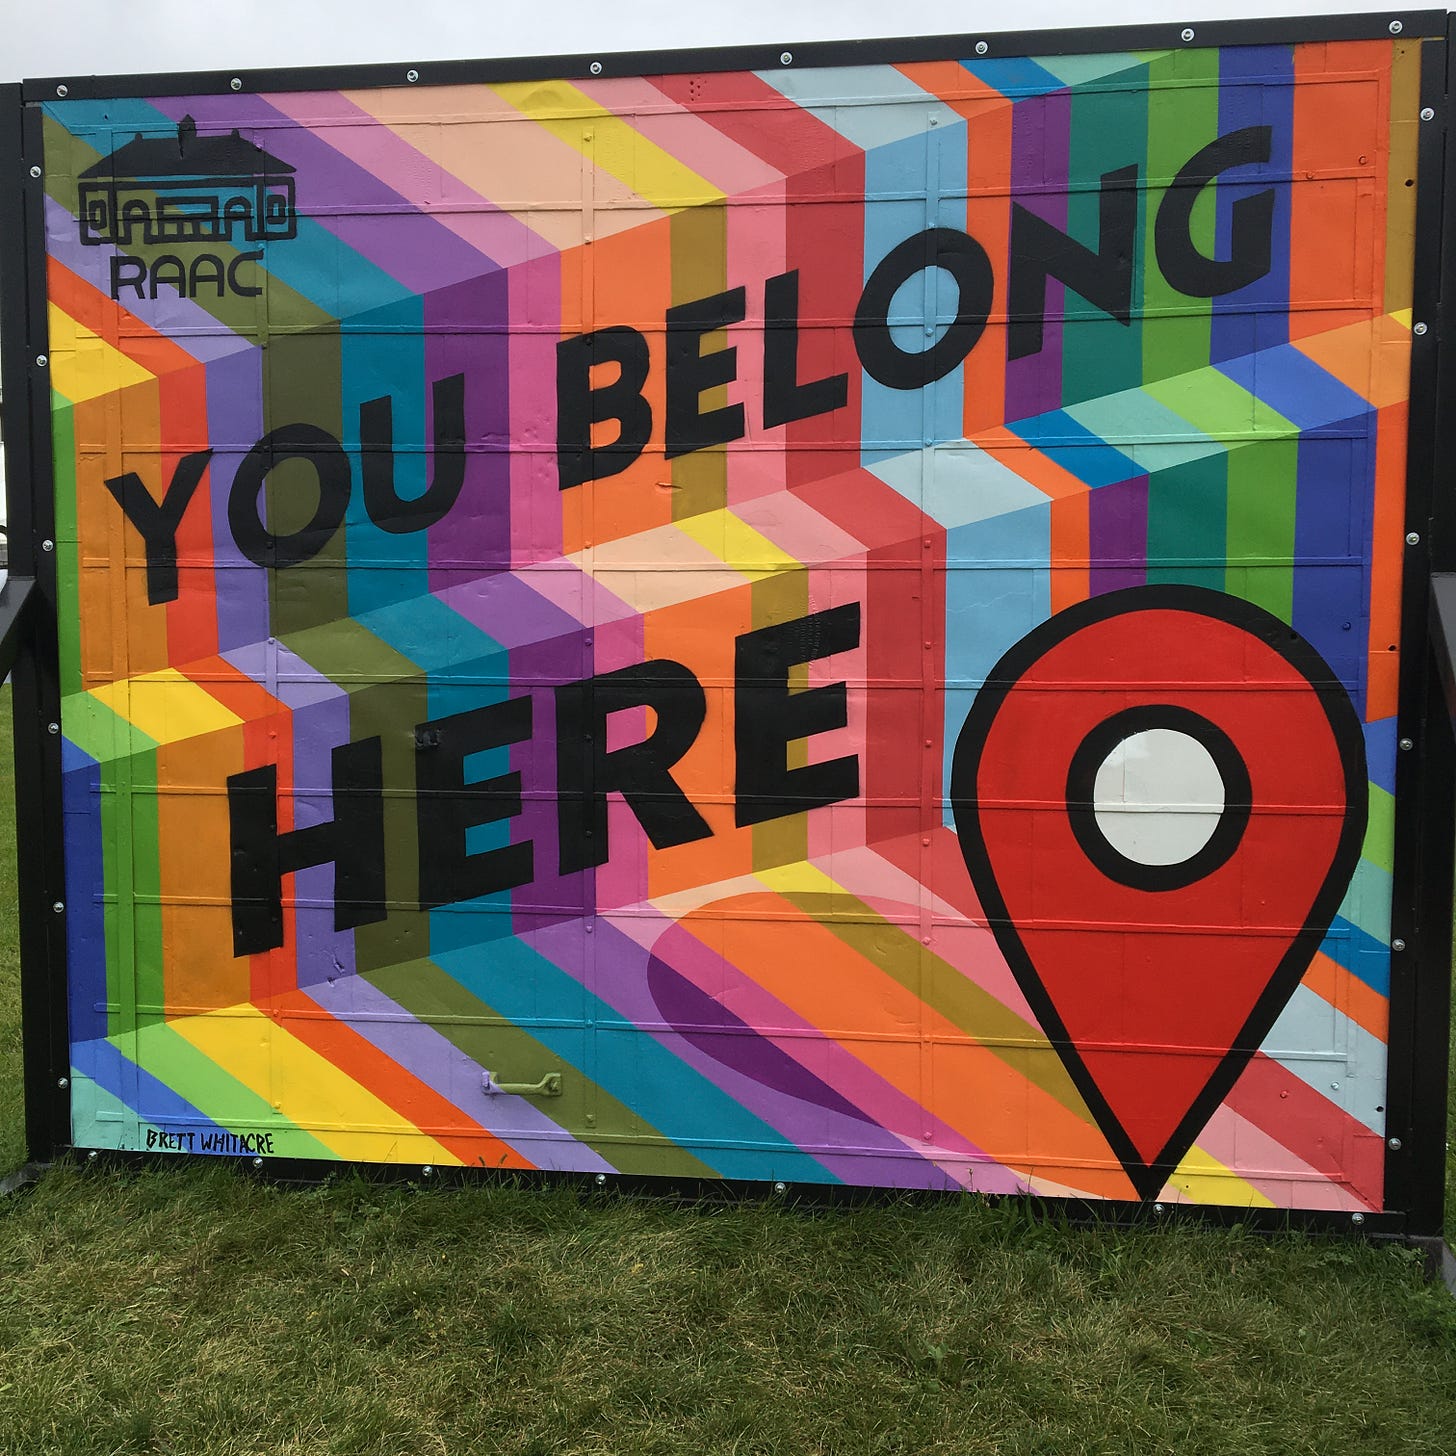 a colorful mural that says "you belong here"